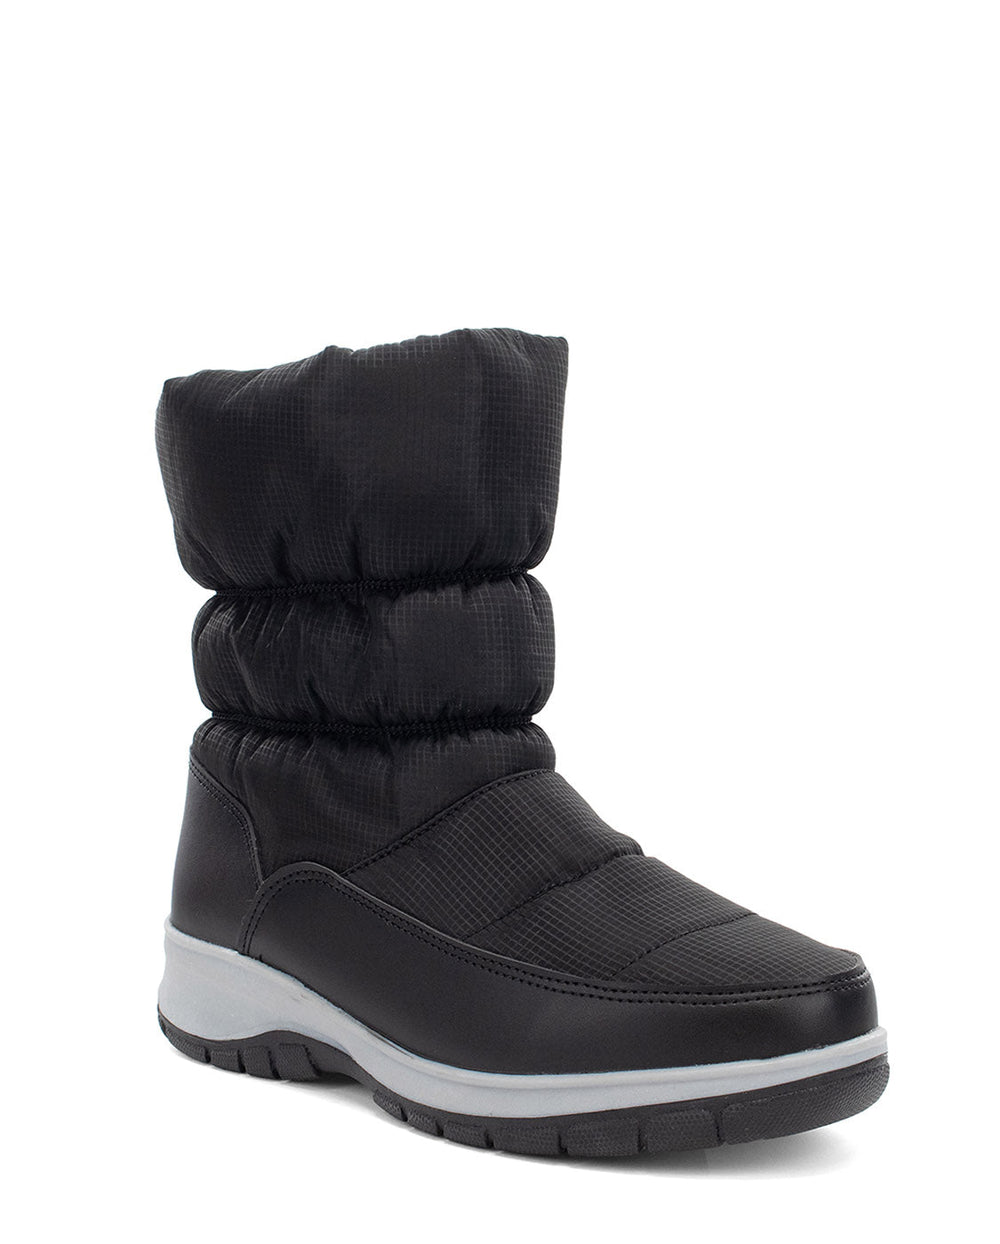 Women's Uptown Mid Cold Weather Boot - Black - Western Chief